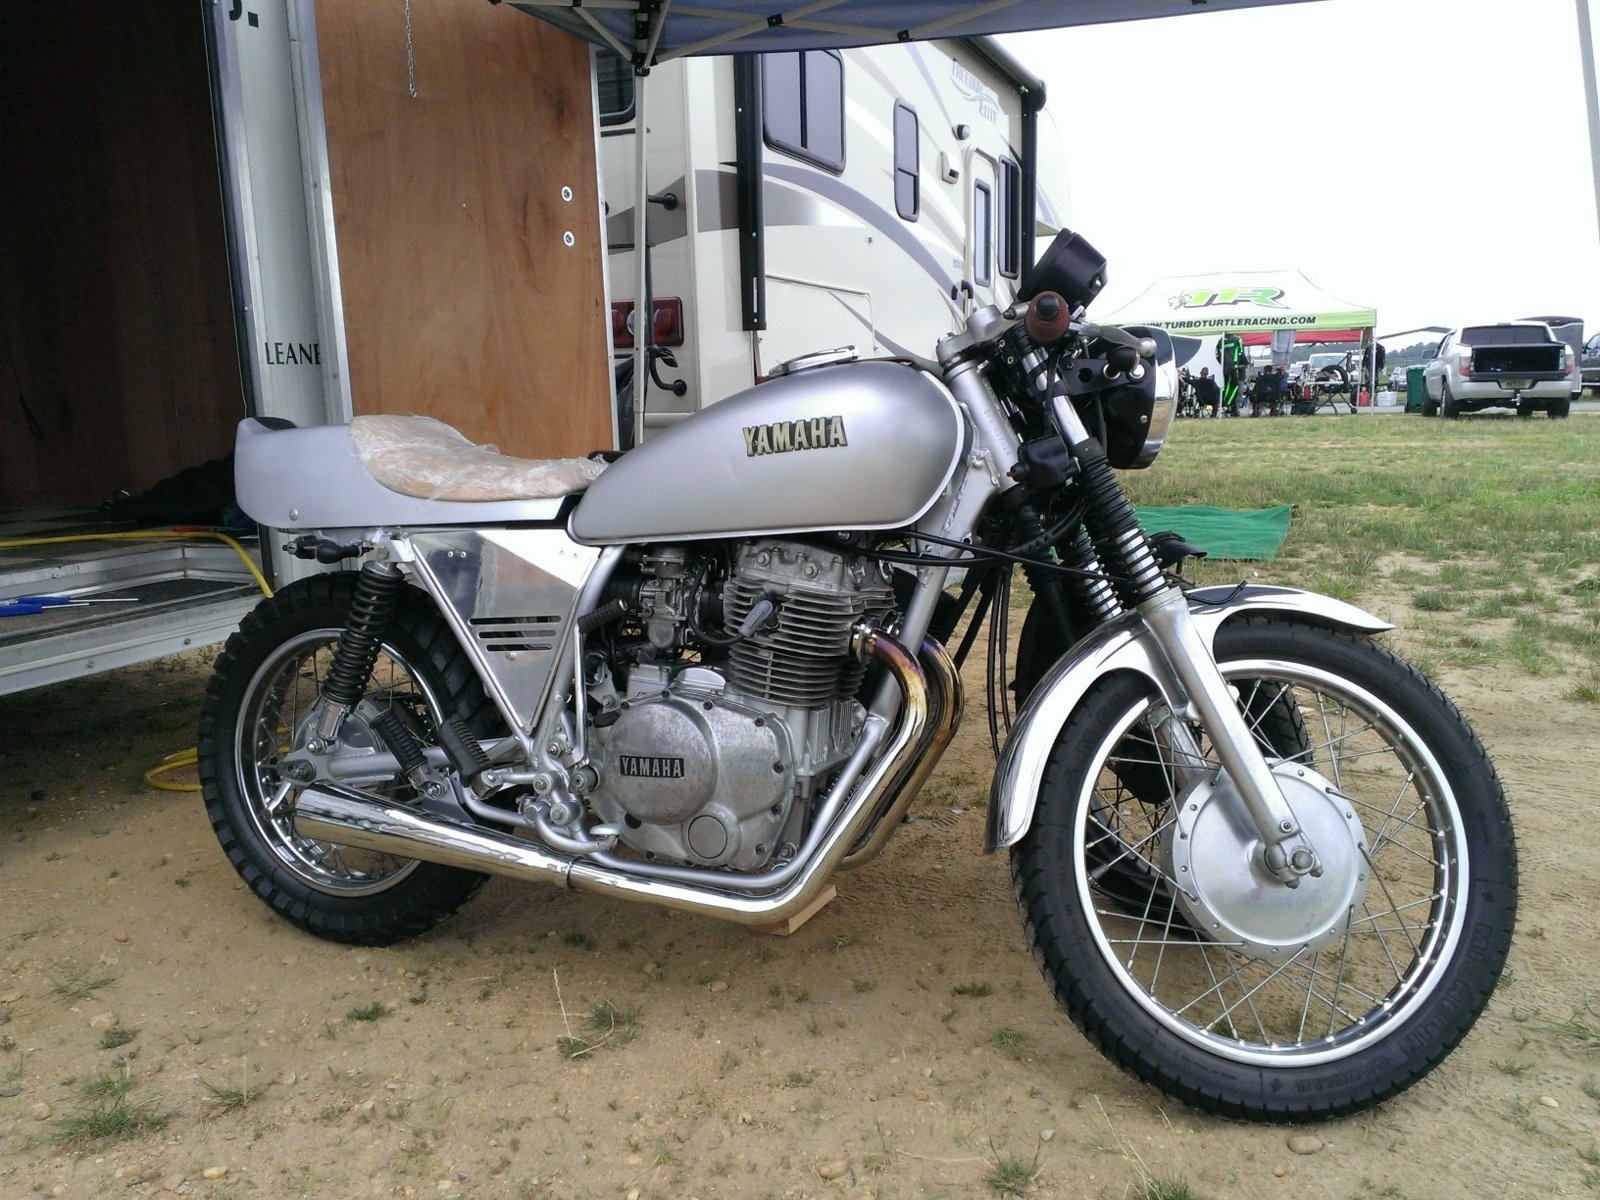 Another XS400 at the races